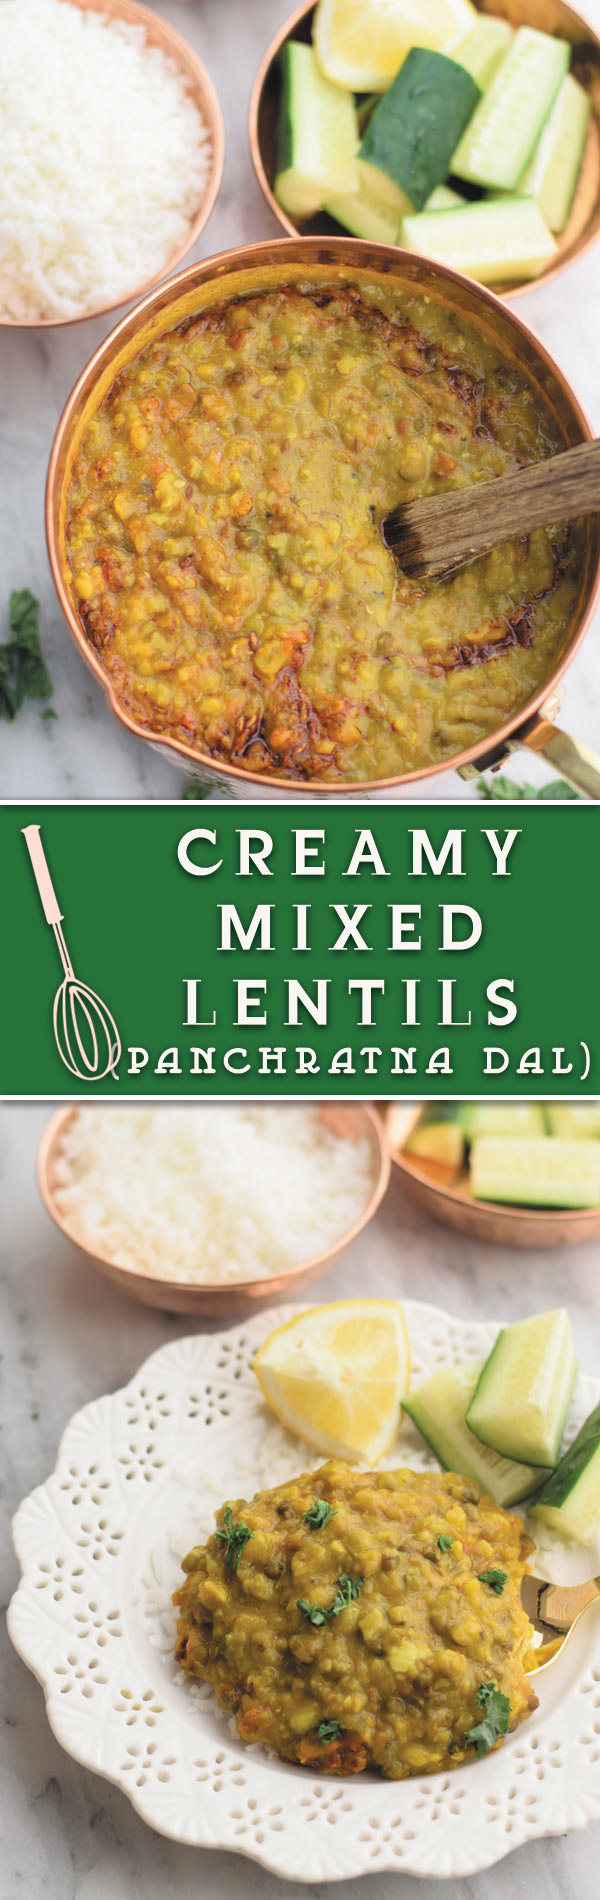 Creamy mixed lentils - Creamy lentils made using 5 kinds of lentils with tomatoes & onions. So creamy, addicting and pure comfort food!